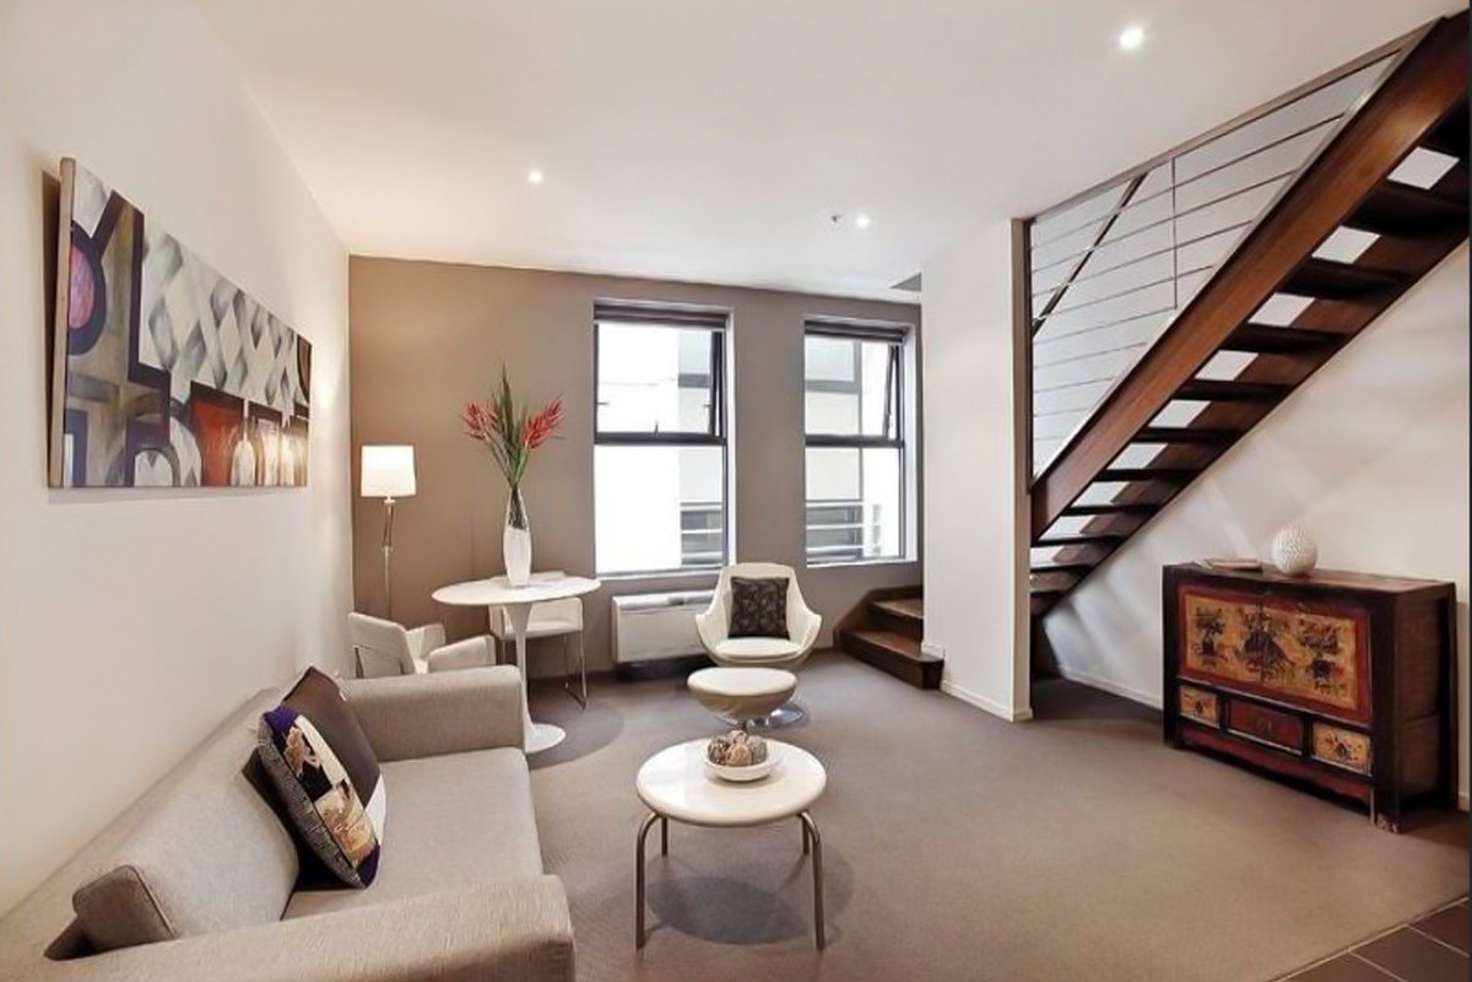 Main view of Homely apartment listing, 514/9 Degraves Street, Melbourne VIC 3000